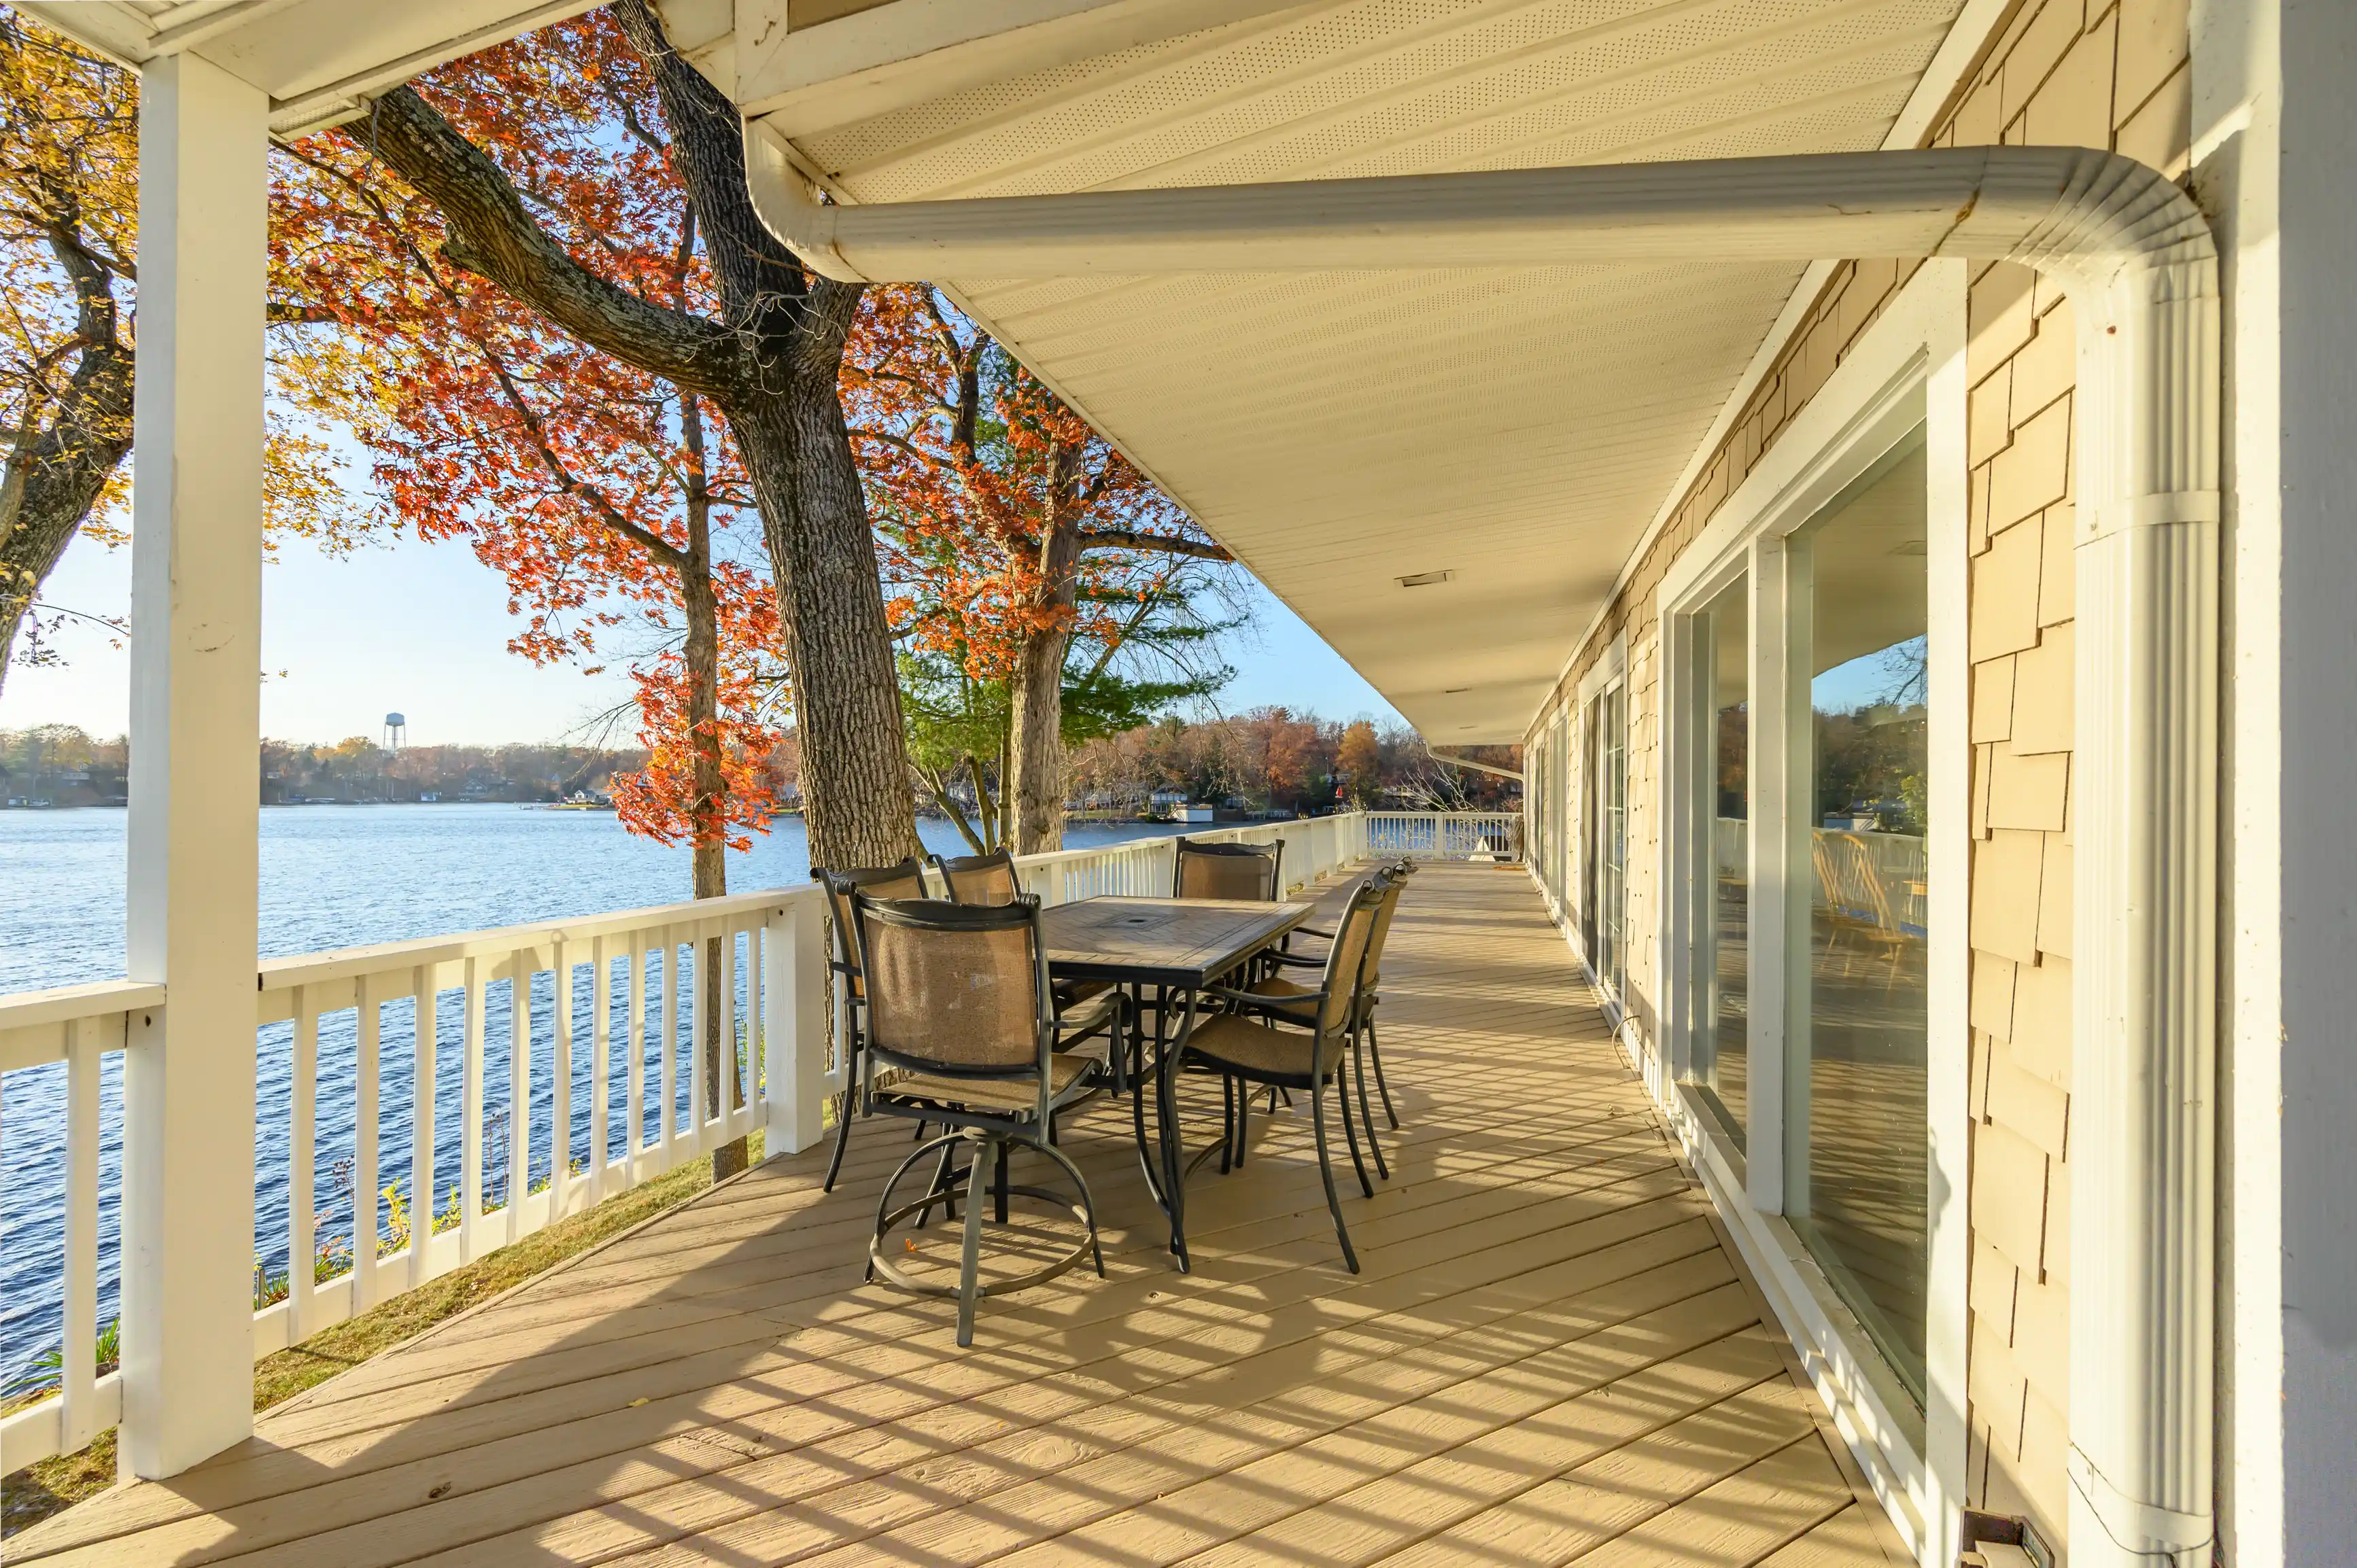 Spacious lakefront porch with outdoor dining furniture set, overlooking a tranquil lake with autumn foliage on a clear sunny day.